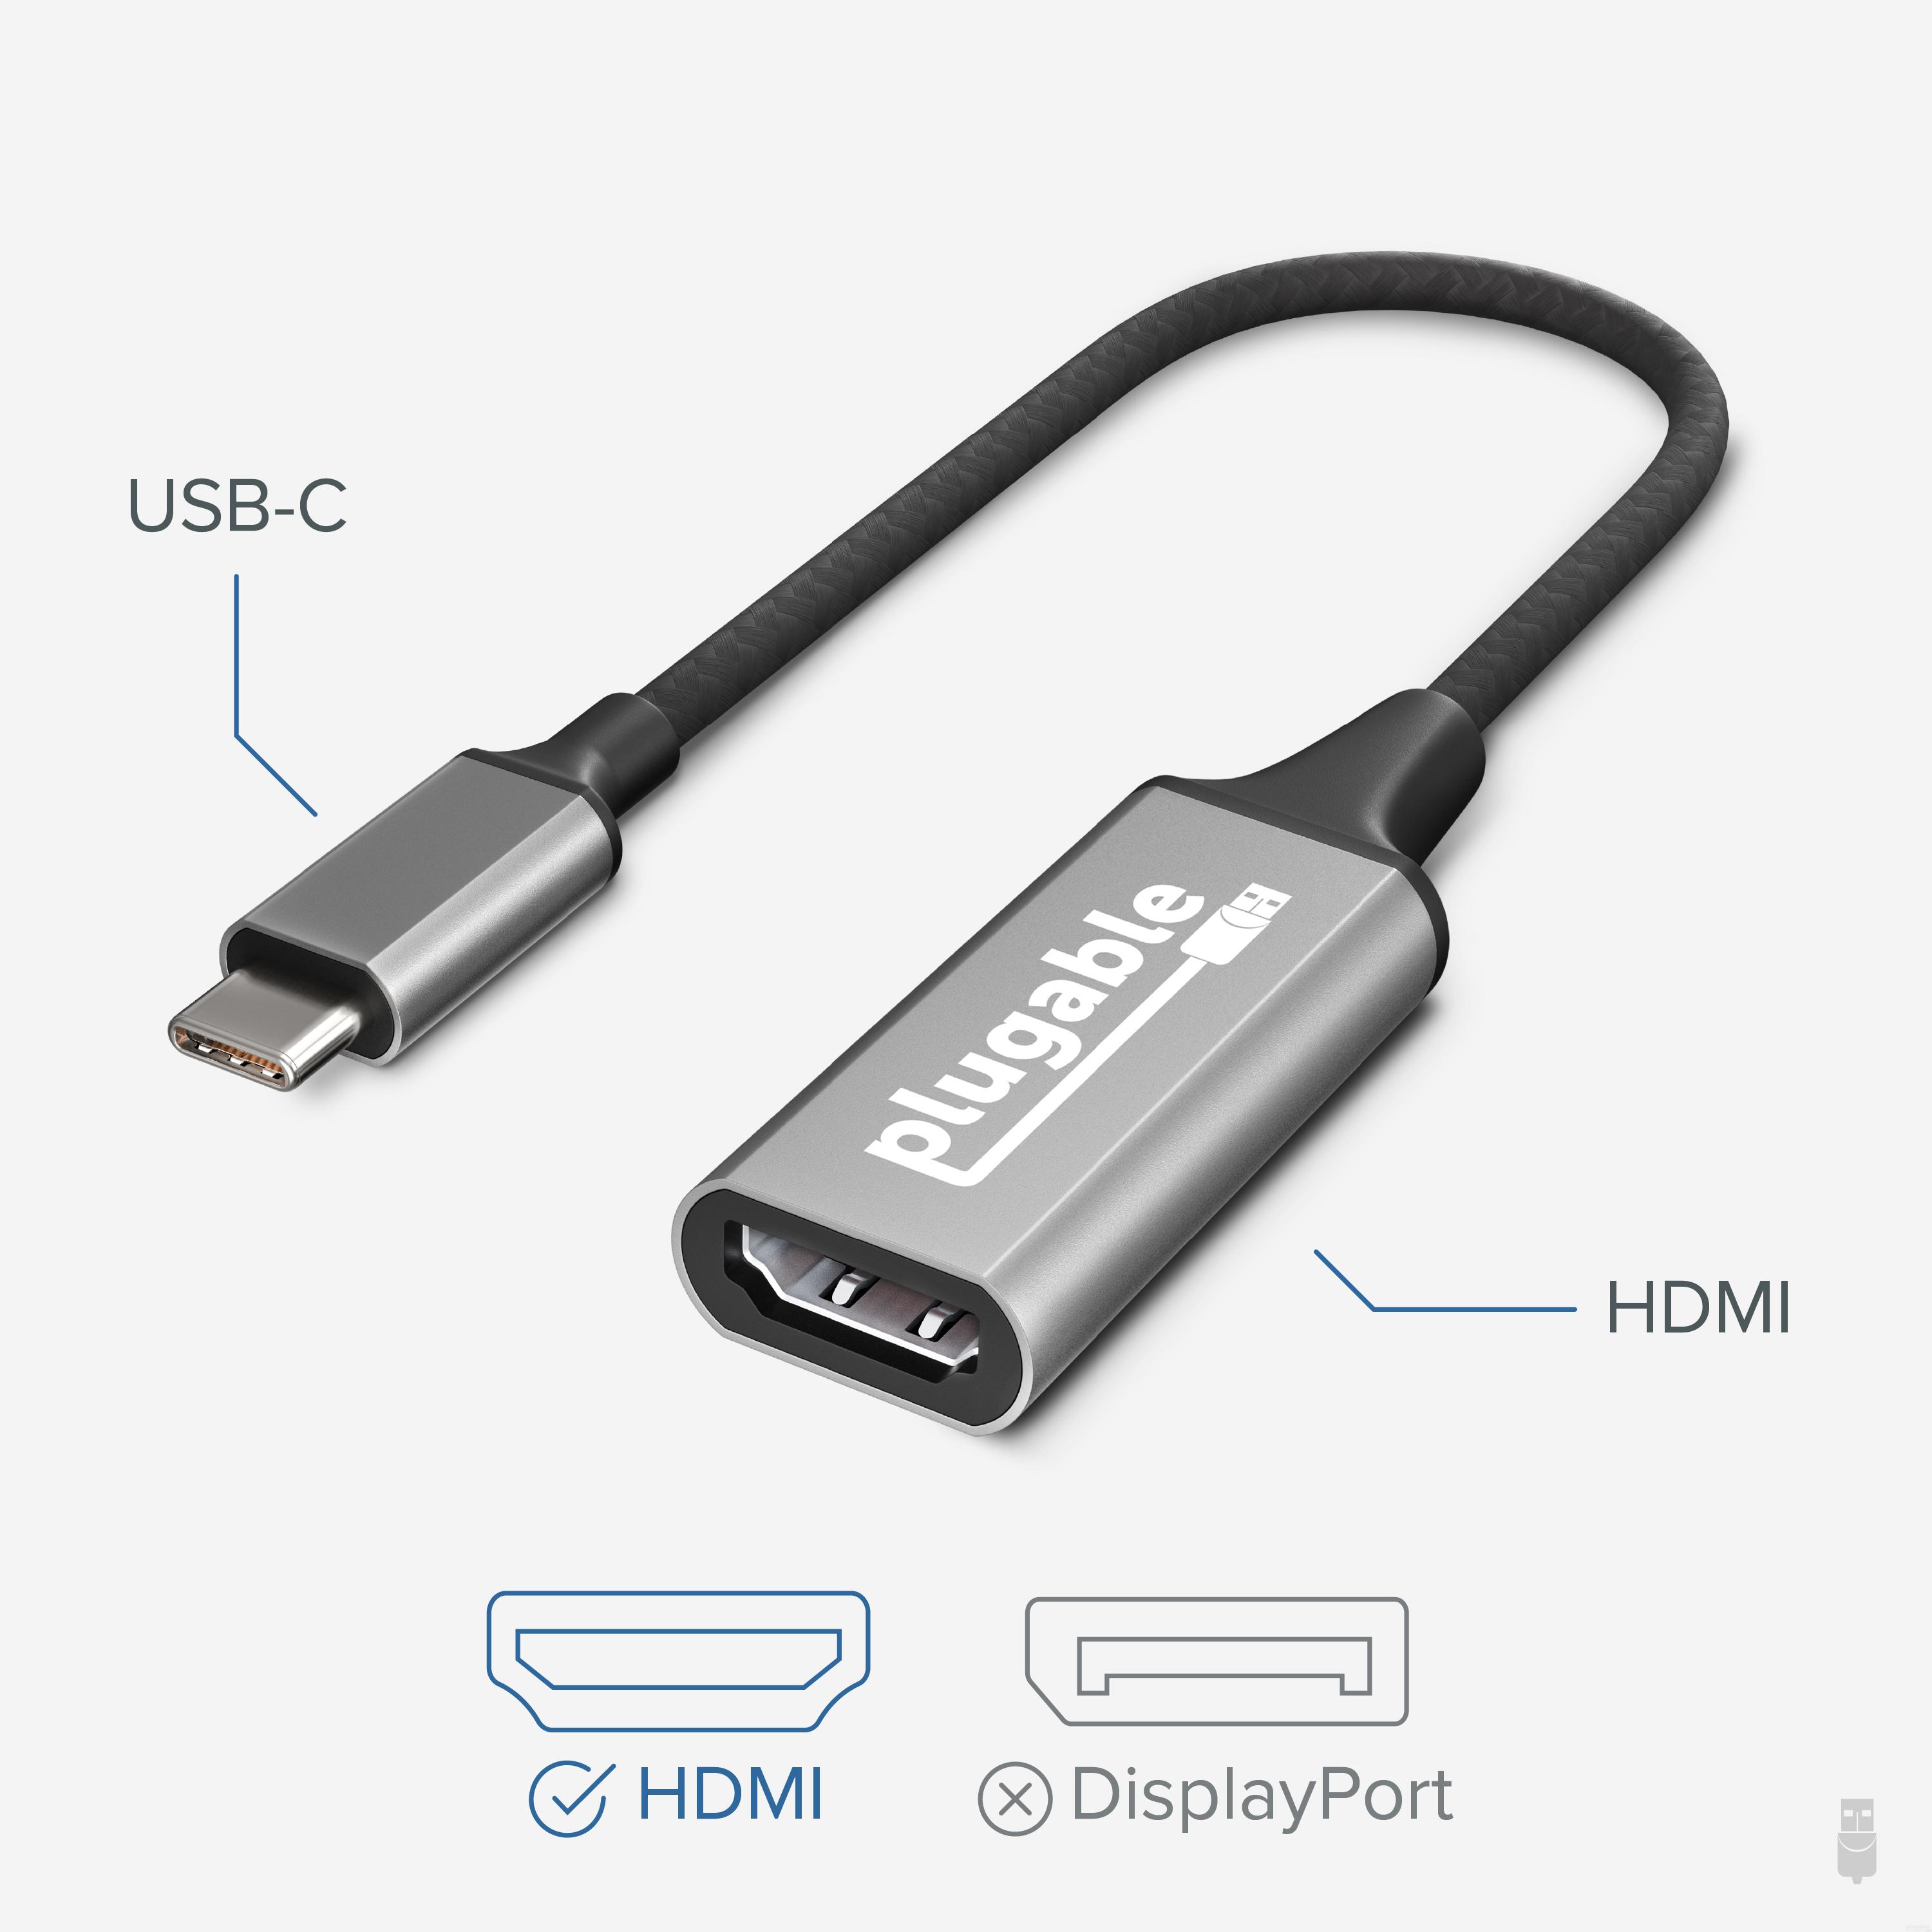 Plugable USB C to HDMI 2.0 Adapter Compatible with 2018 iPad Pro, 2018 MacBook Air, 2018 MacBook Pro, Dell XPS 13 & 15, Thunderbolt 3 Ports & More (Supports Resolutions up to 4K@60Hz) - image 2 of 6